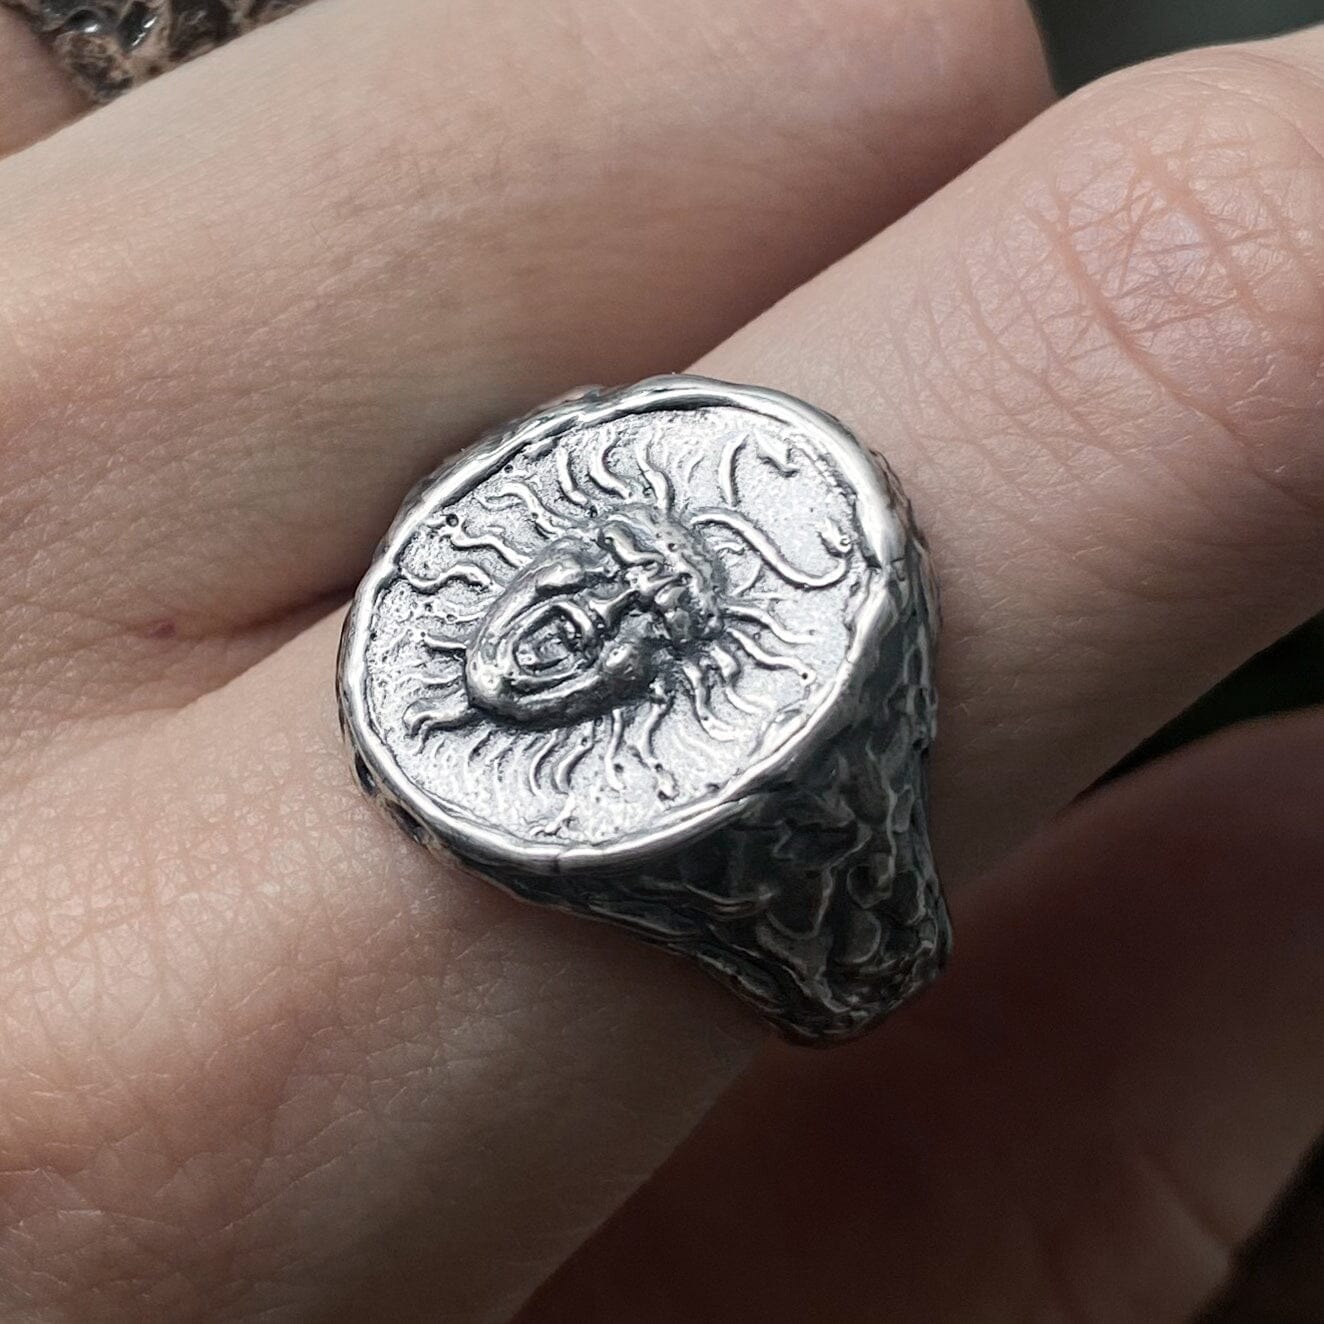 The Medusa ring is an oval signet ring with an unusual fused texture and a portrait of the Gorgon Medusa Unusual rings Project50g 